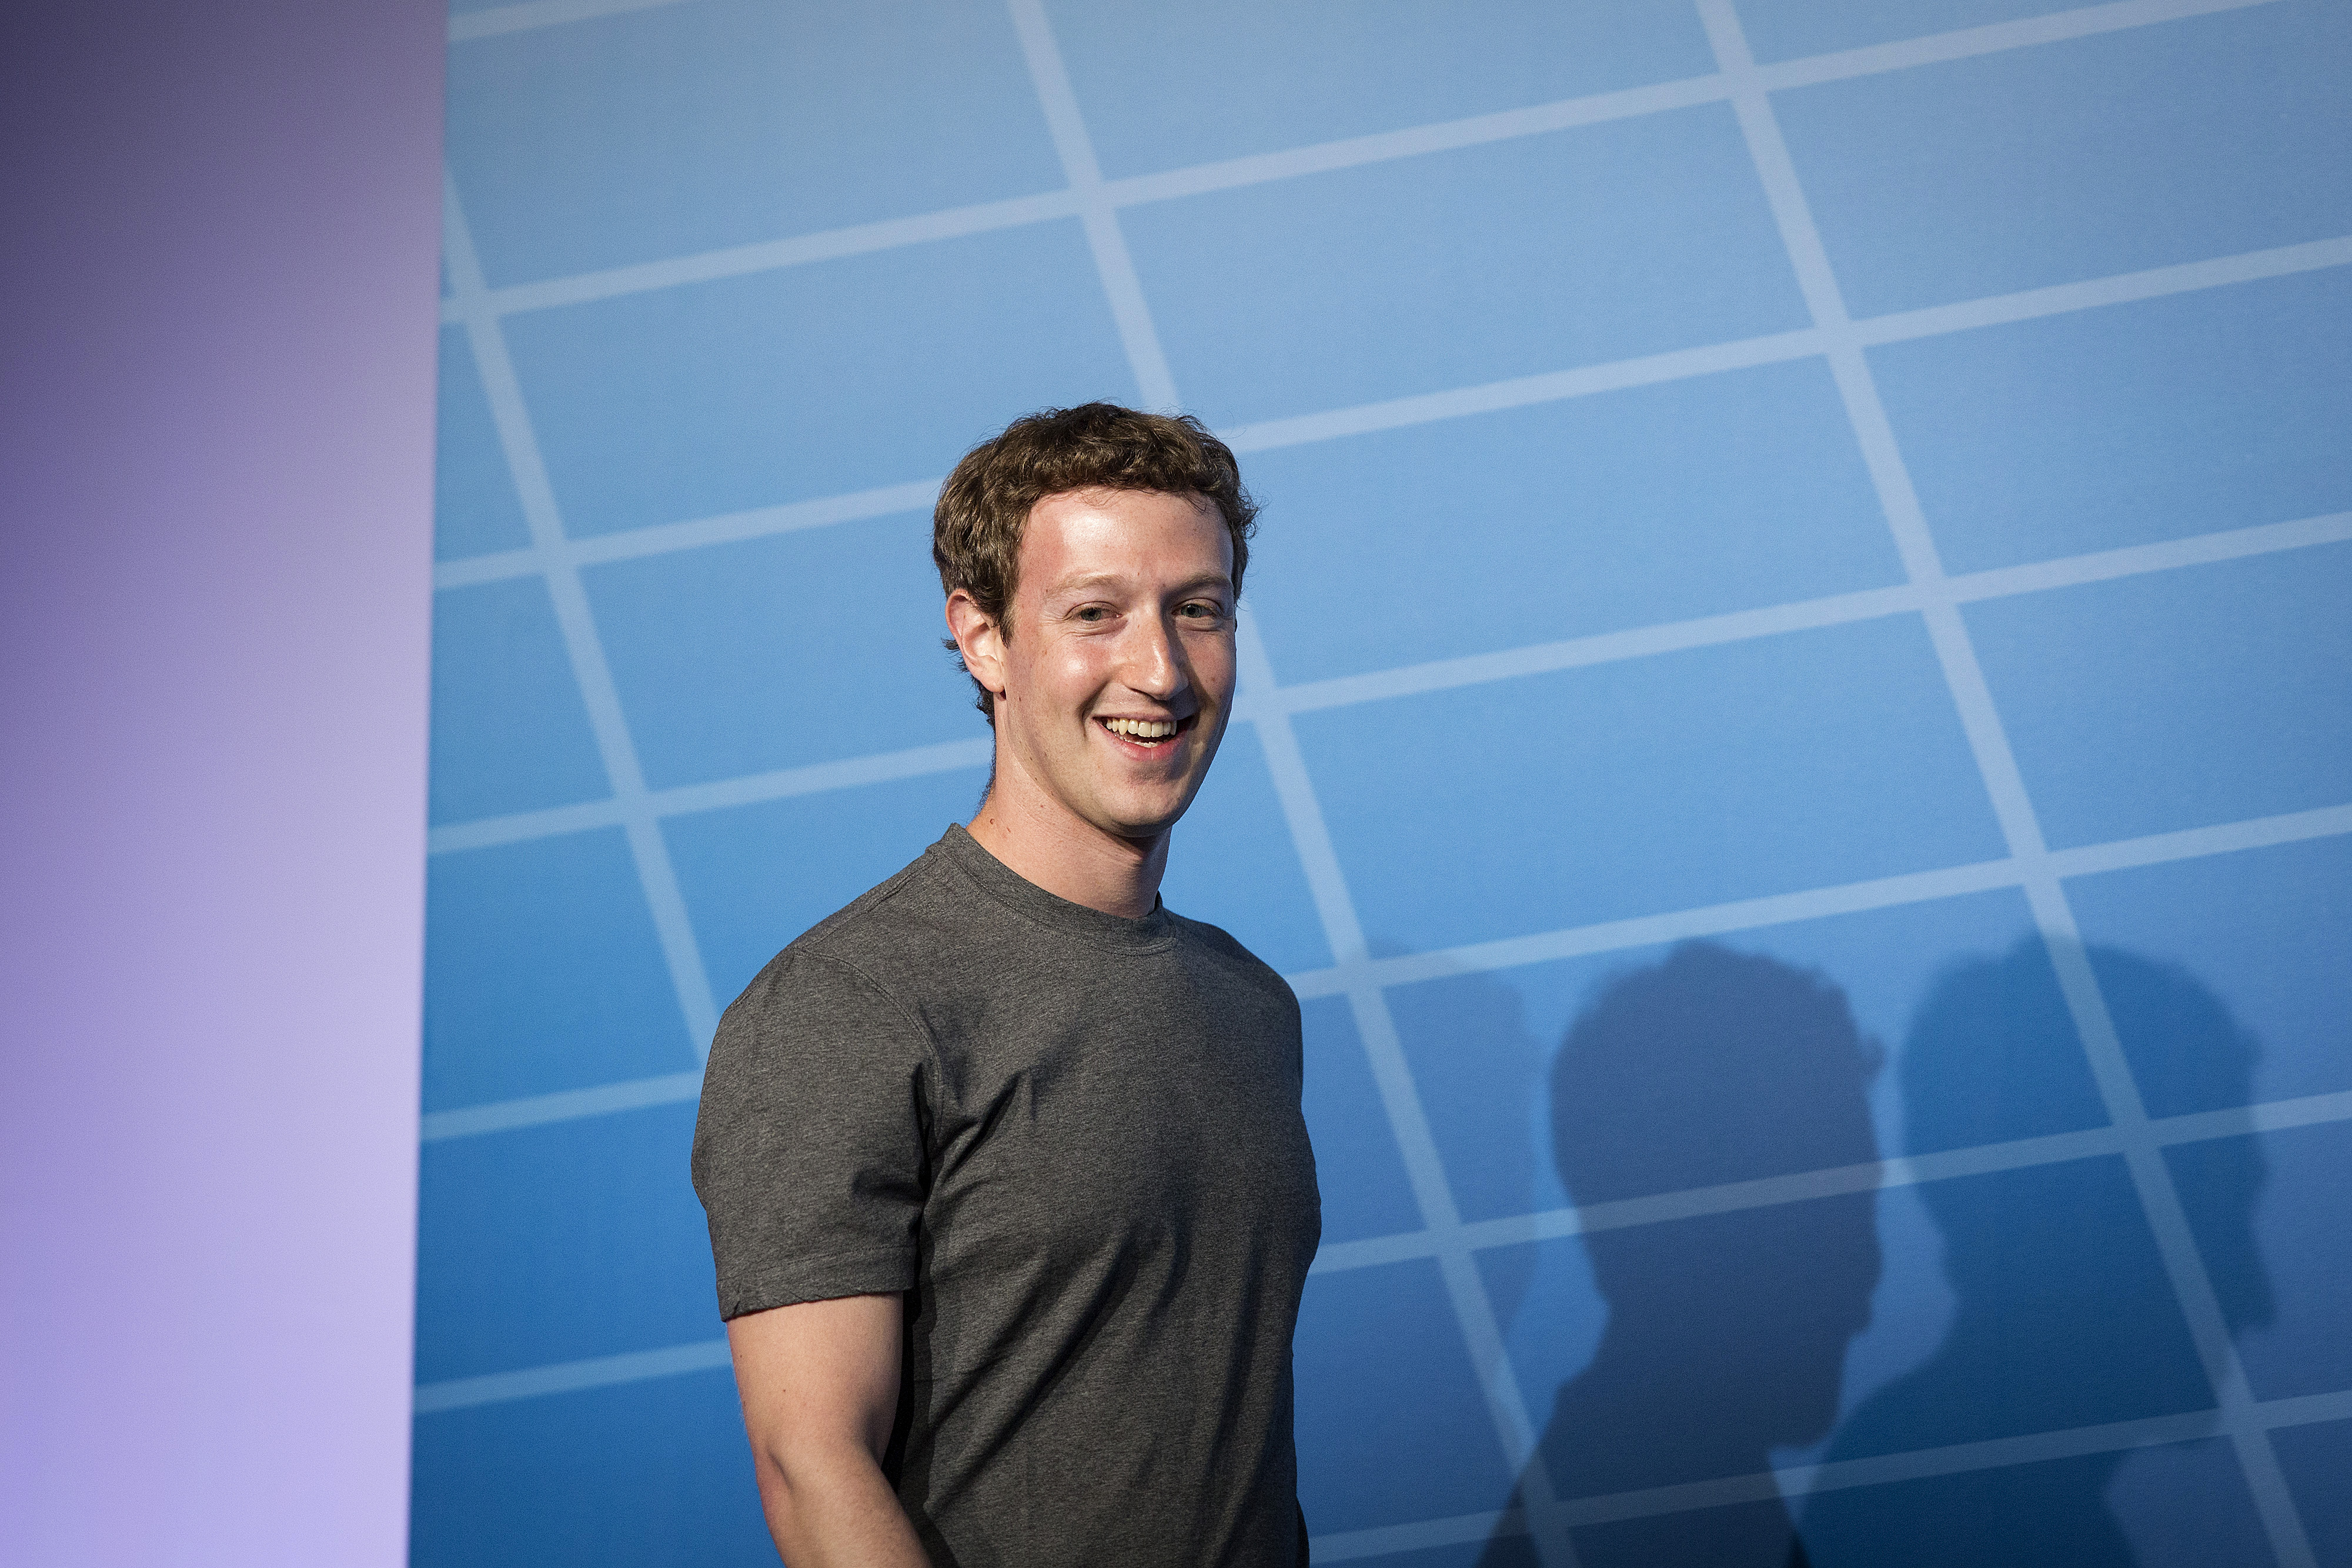 Mark Zuckerberg arrives for a keynote session on the opening day of the Mobile World Congress in Barcelona, Feb. 24, 2014. (Simon Dawson—Bloomberg/Getty Images)